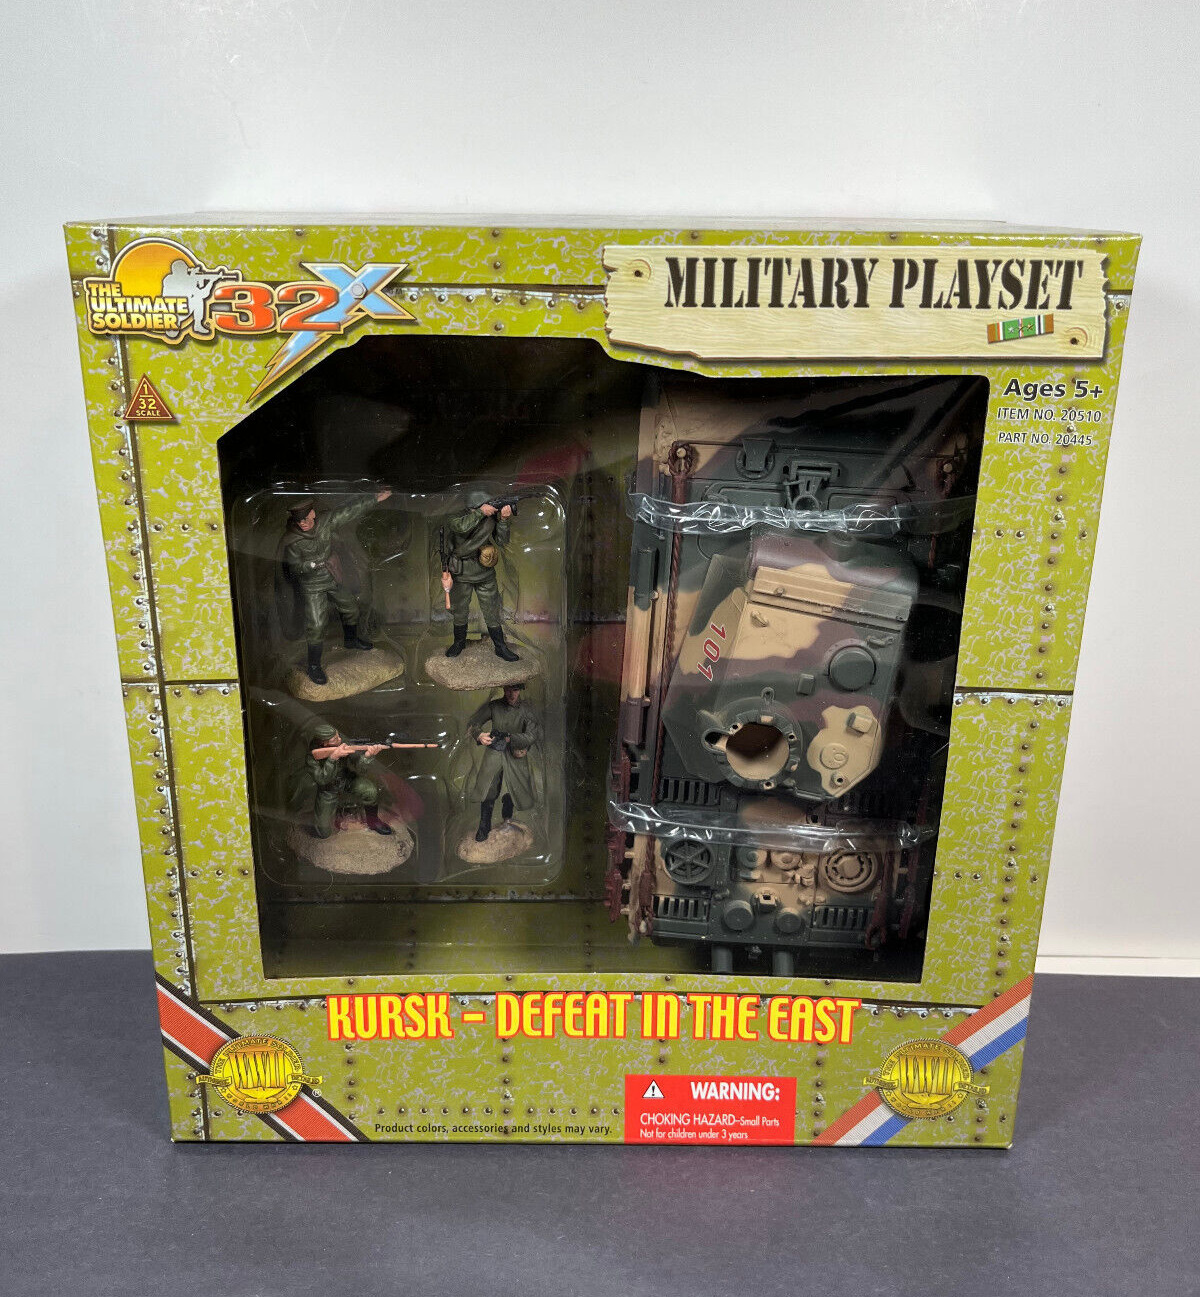 Ultimate Soldier 32X KURSK DEFEAT IN THE EAST PLAYSET WWII Figure Set 1:32 Scale